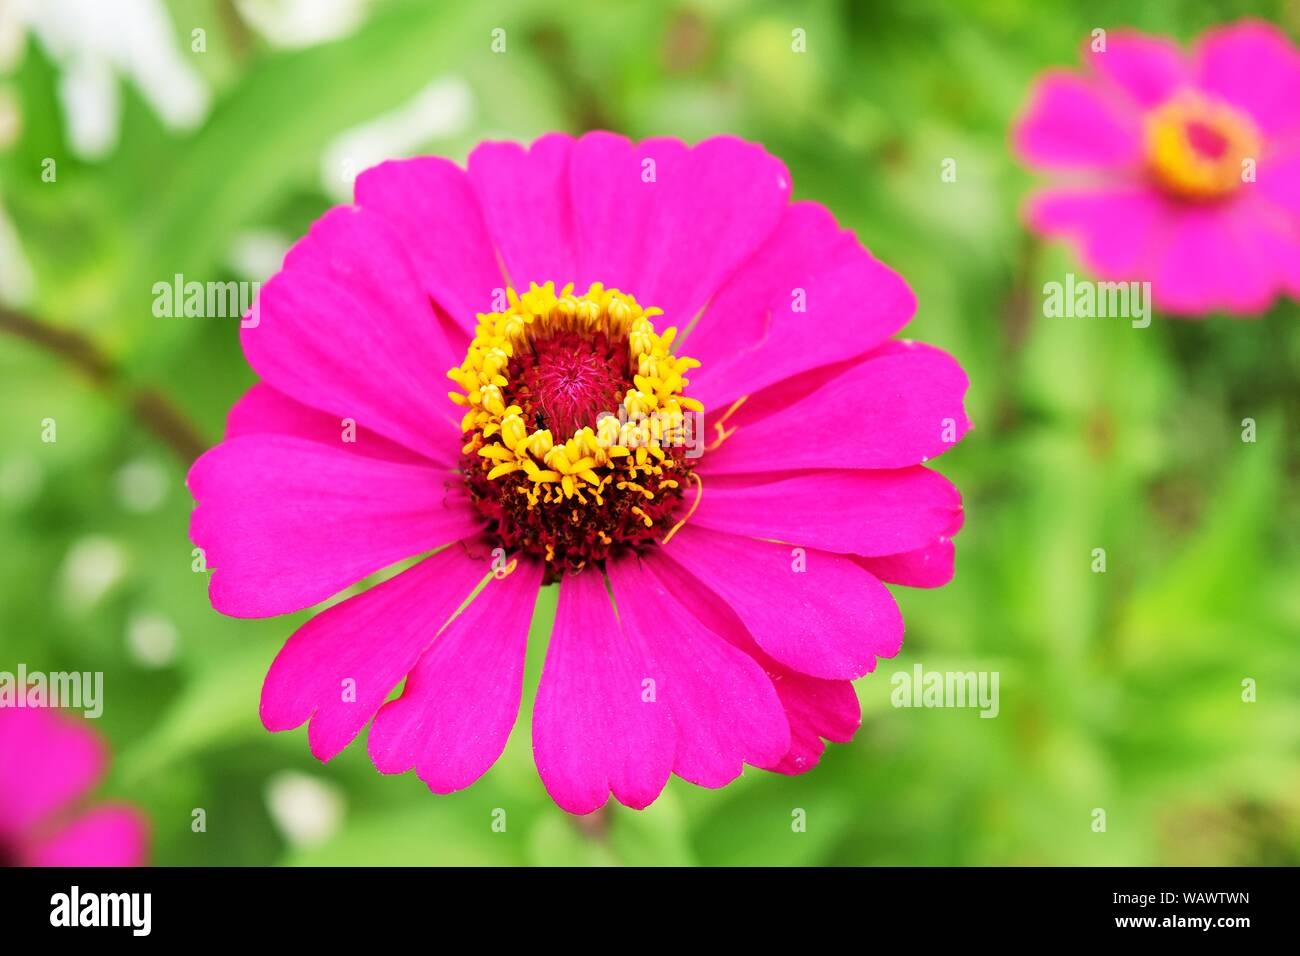 Purple flower blossoming  reveals yellow pollen with  natural green leaves in the background,Zinnia , Zinnia violacea Cav Stock Photo